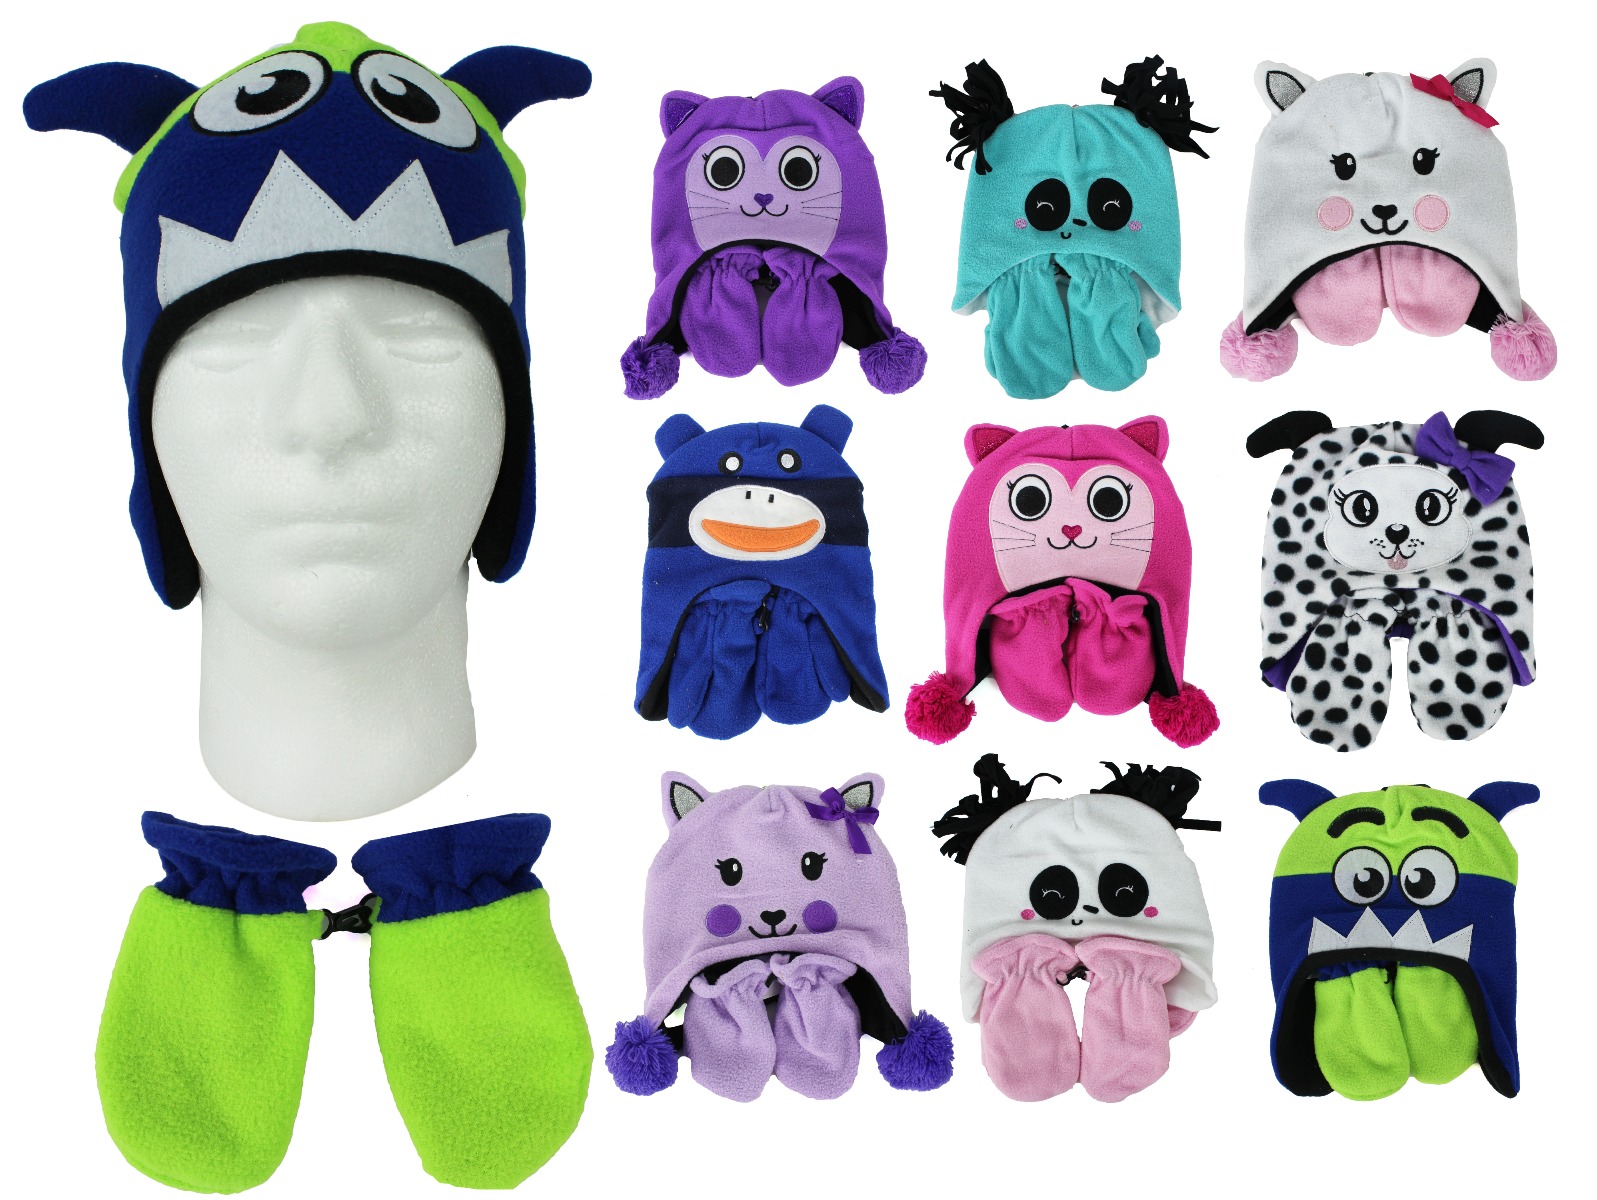 Infant & Toddler's Premium Sherpa Winter Hat & Mitten Sets w/ Embroidered Animal & Monster Designs